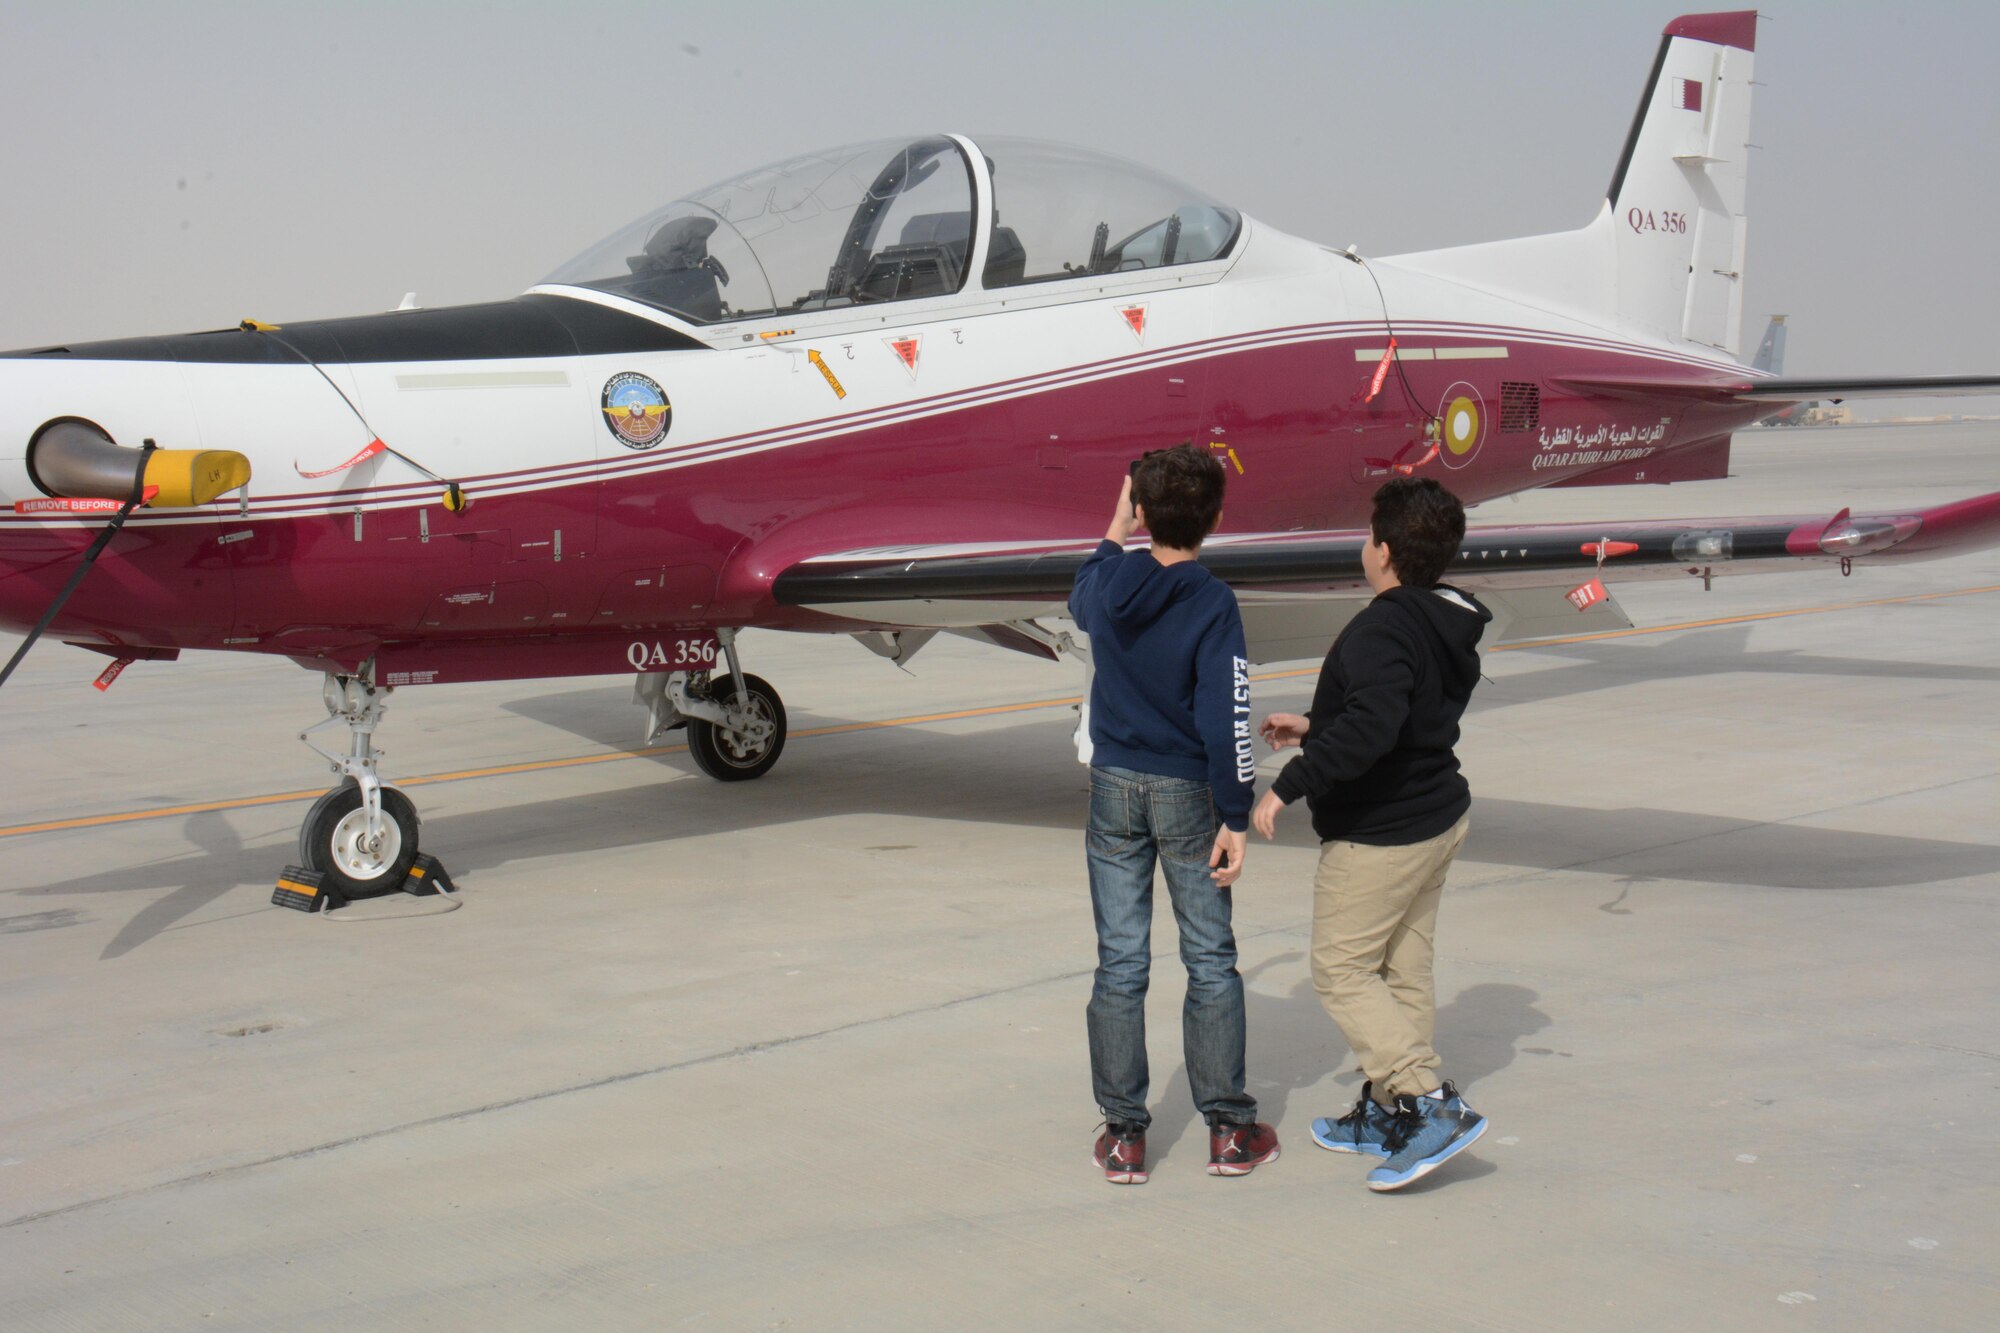 Two children take photos of a PC-21 with one of their cell phones during the annual Flight Line Fest at Al Udeid Air Base, Qatar, Jan. 10. The plane is used to train Qatar Emiri Air Force pilots and flies at a max speed of 317 knots. Flight Line Fest is a joint partnership between the 379th Air Expeditionary Wing and QEAF held to foster relations between Qatar and the United States. (U.S. Air Force photo by Tech. Sgt. James Hodgman/Released)